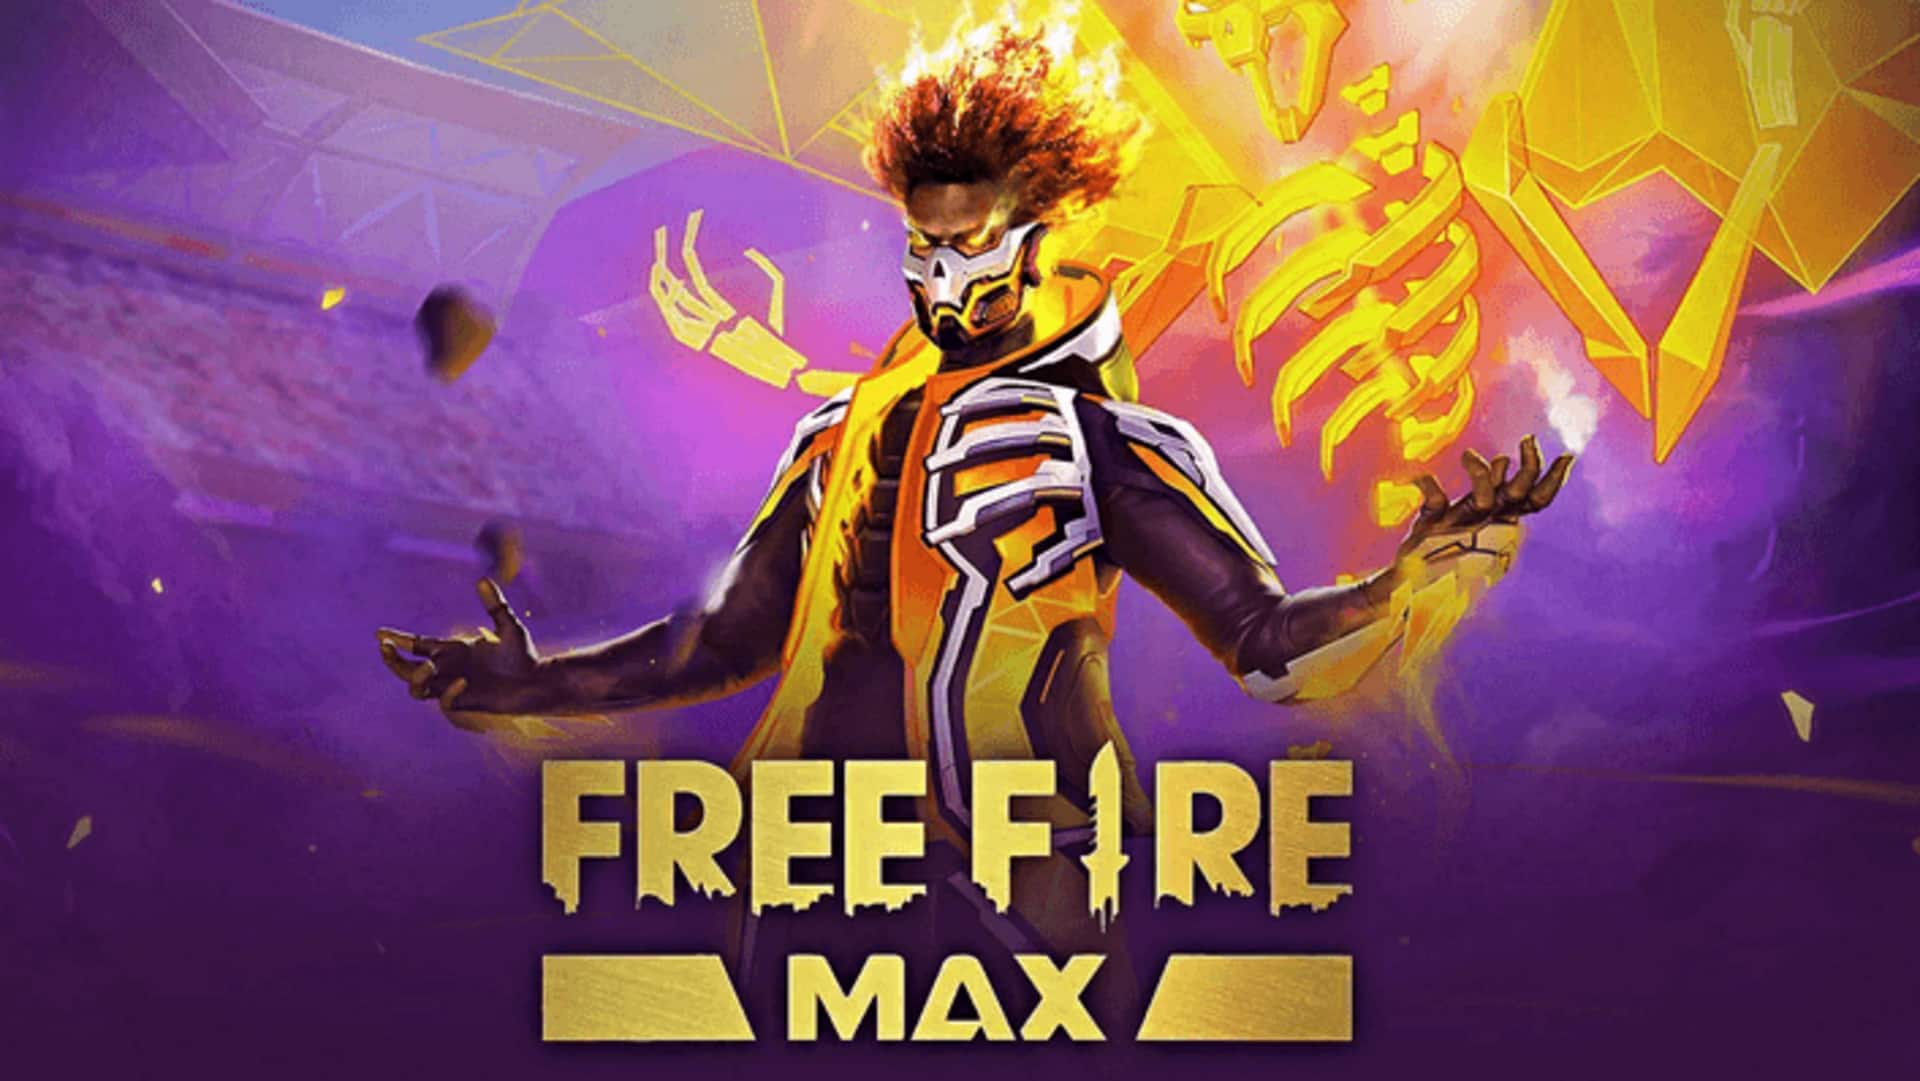 Free Fire MAX's codes for July 5: Collect exclusive rewards